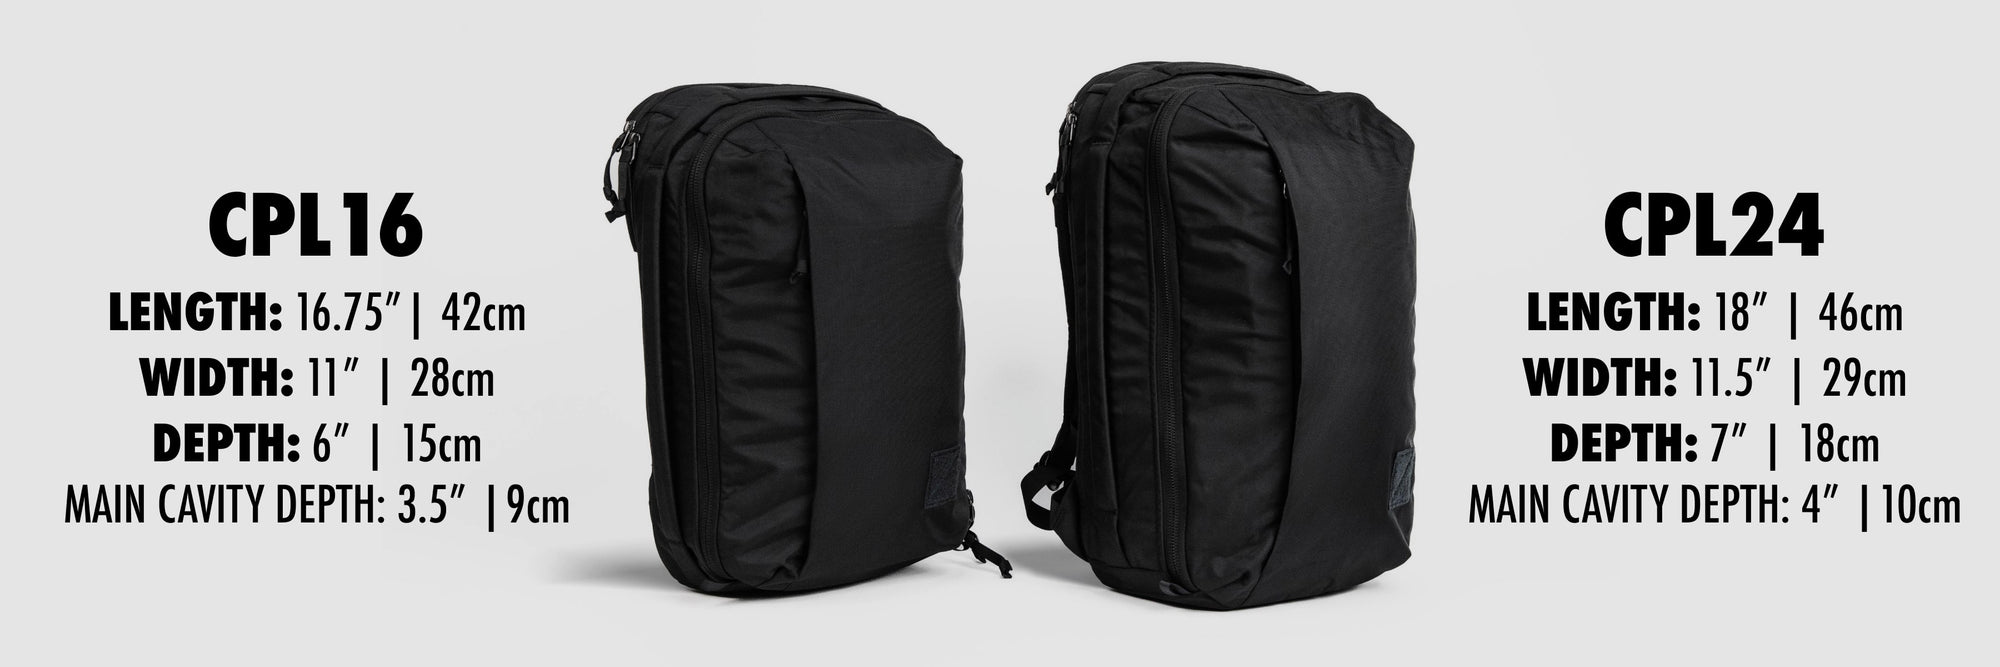 CPL16 vs CPL24 - dimensions of each backpack